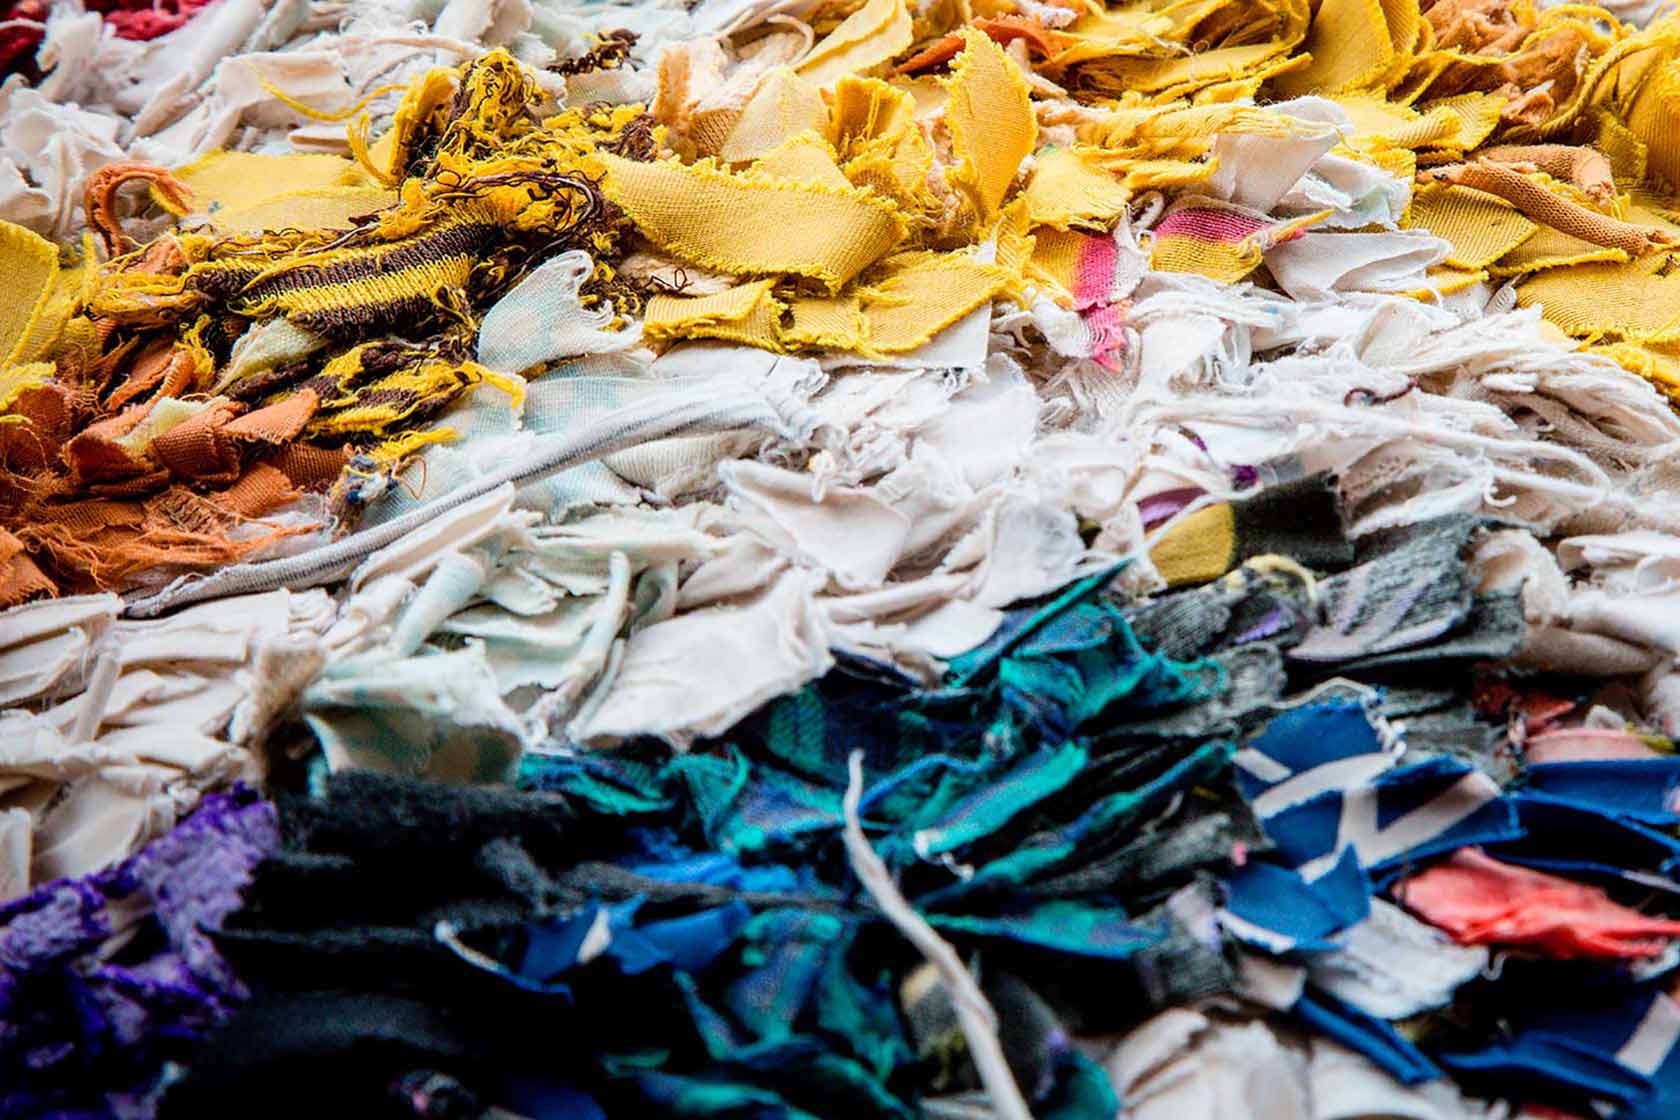 The textile recycling process: From Old Clothes To New Fabric - ZeroPanik